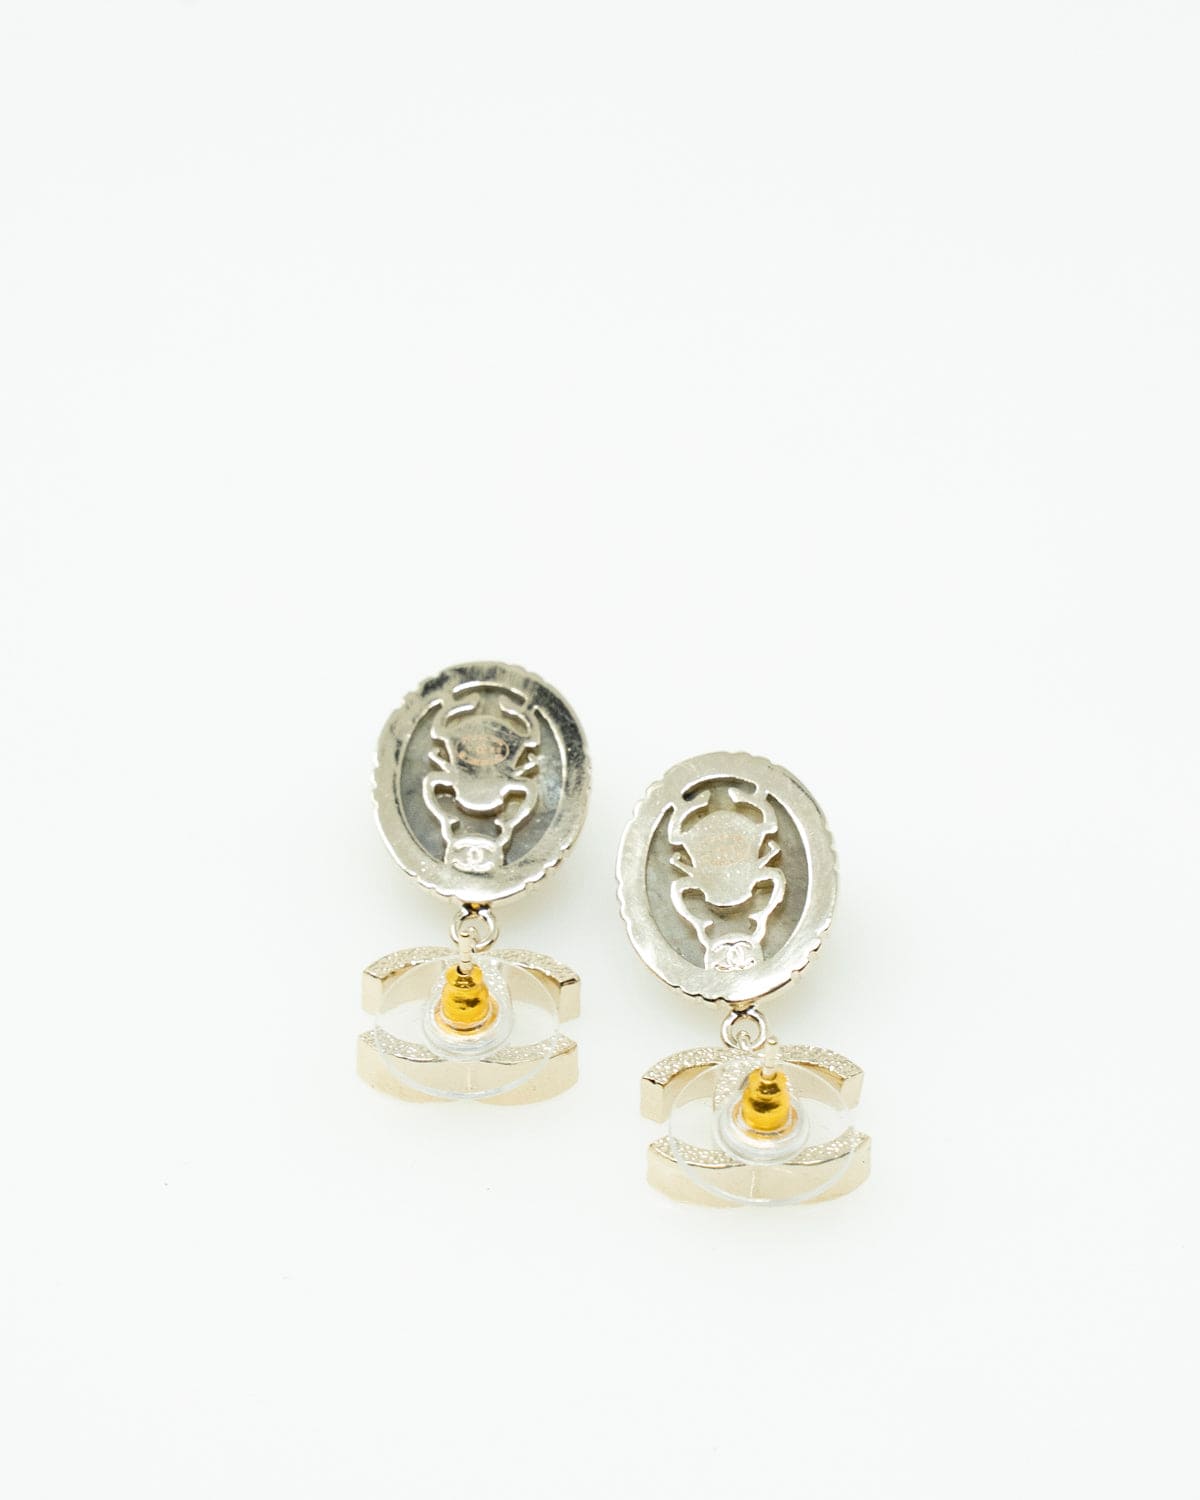 Chanel Chanel cc earrings with Gripoix ADC1176